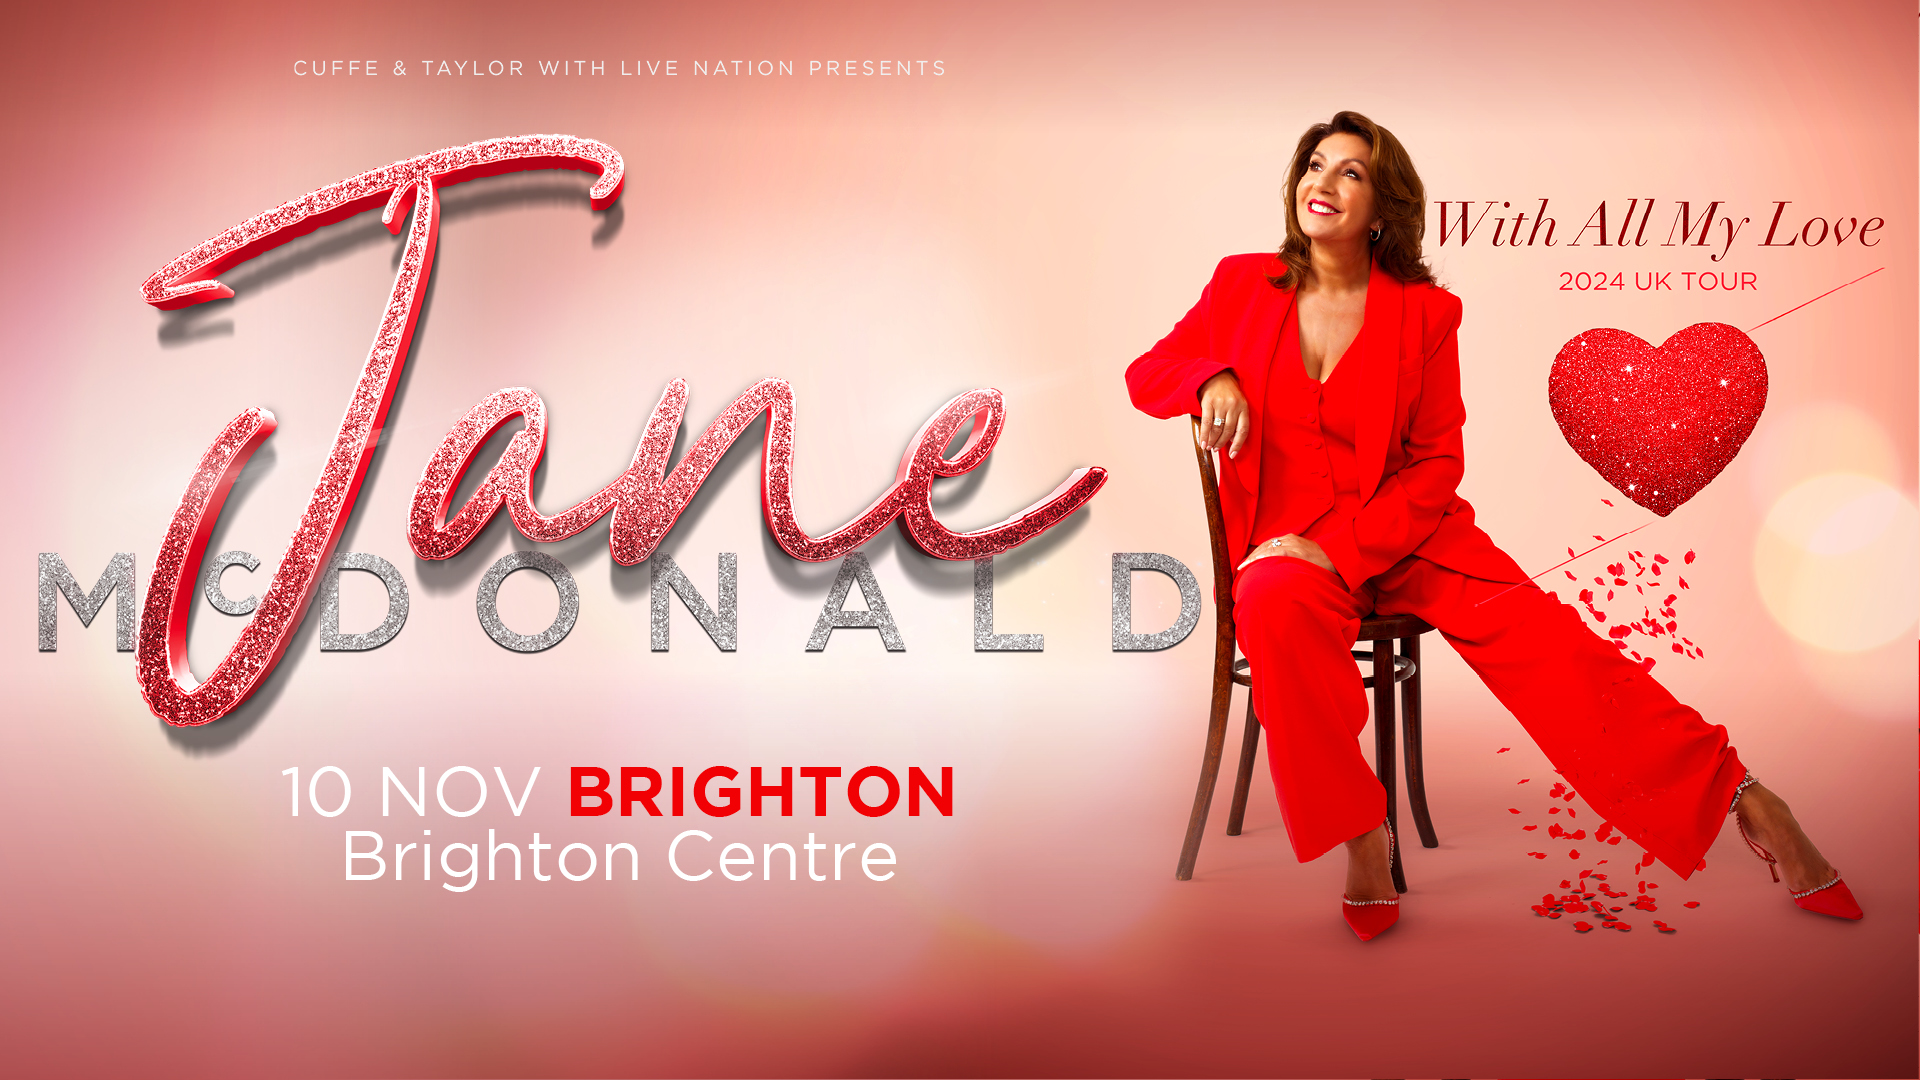 “I cannot wait!” Jane McDonald announces new tour, WITH ALL MY LOVE, which includes Brighton Centre date